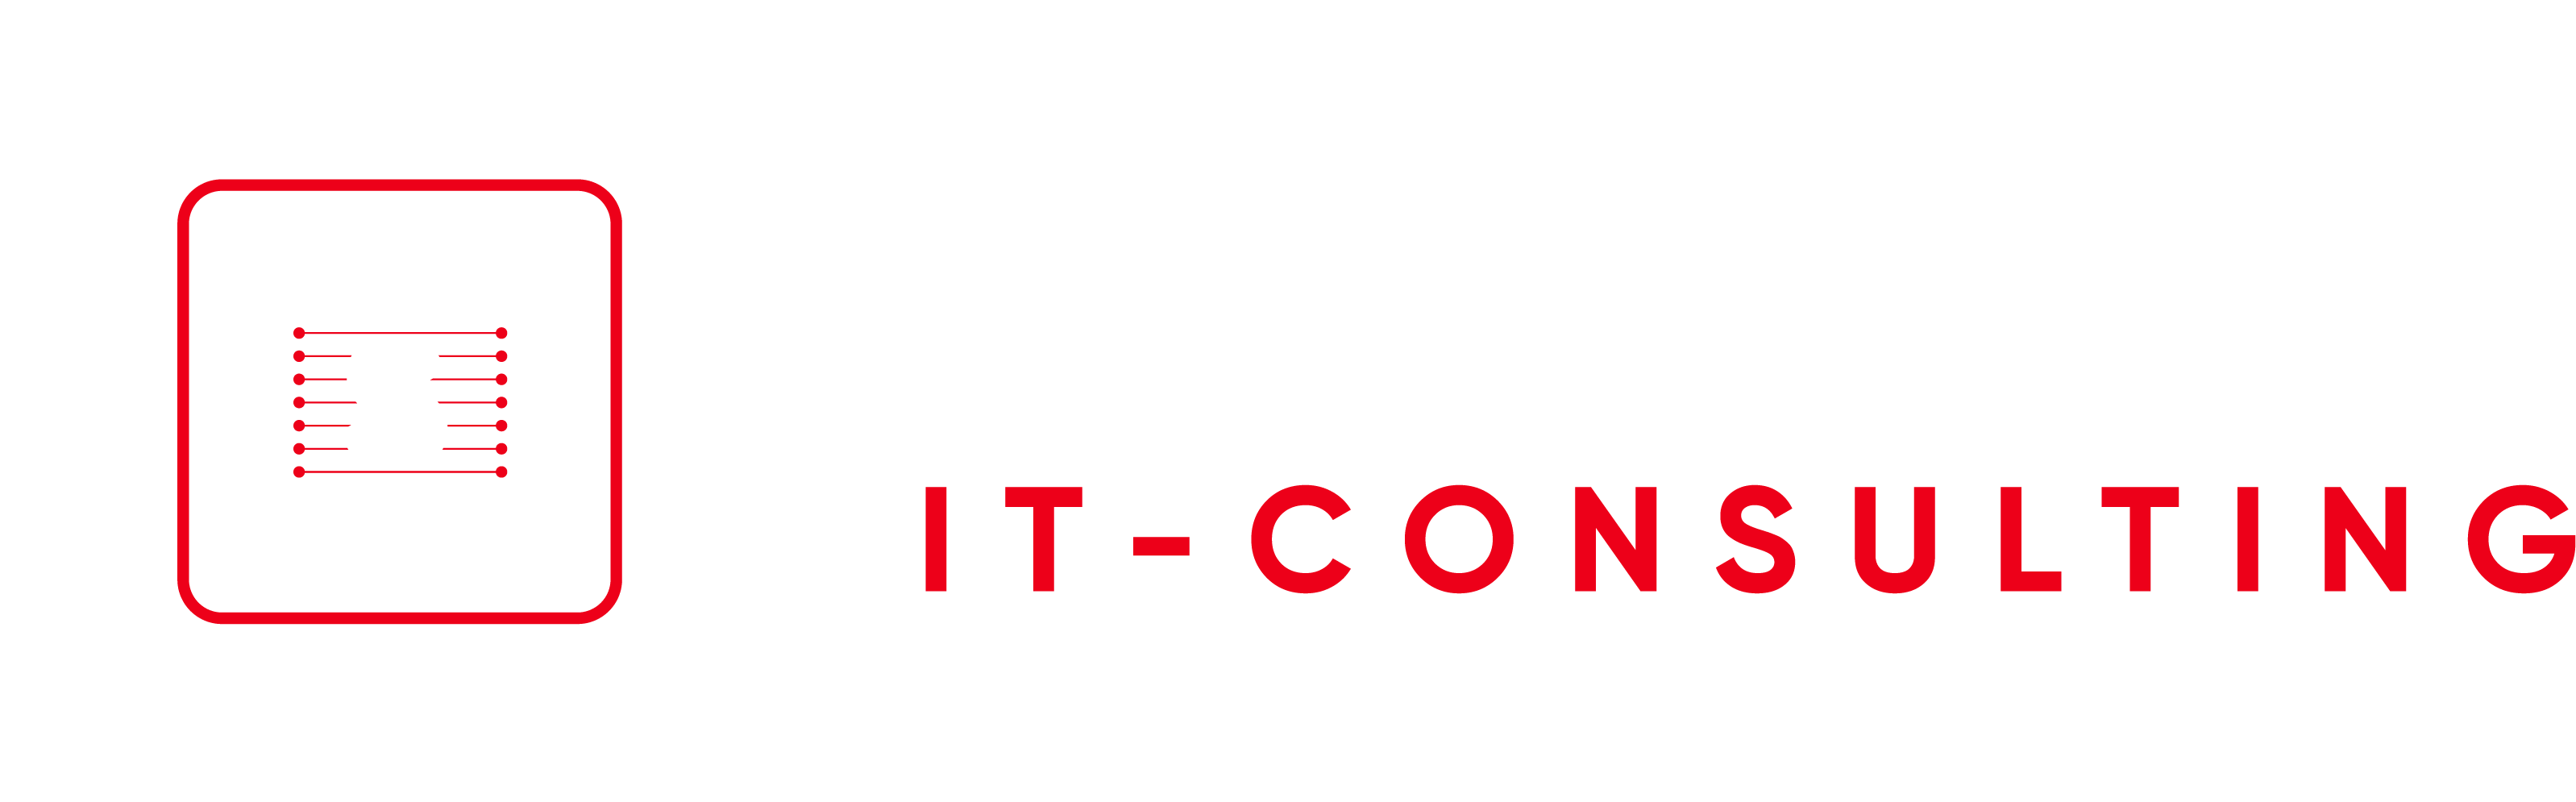 Steidler IT-Consulting